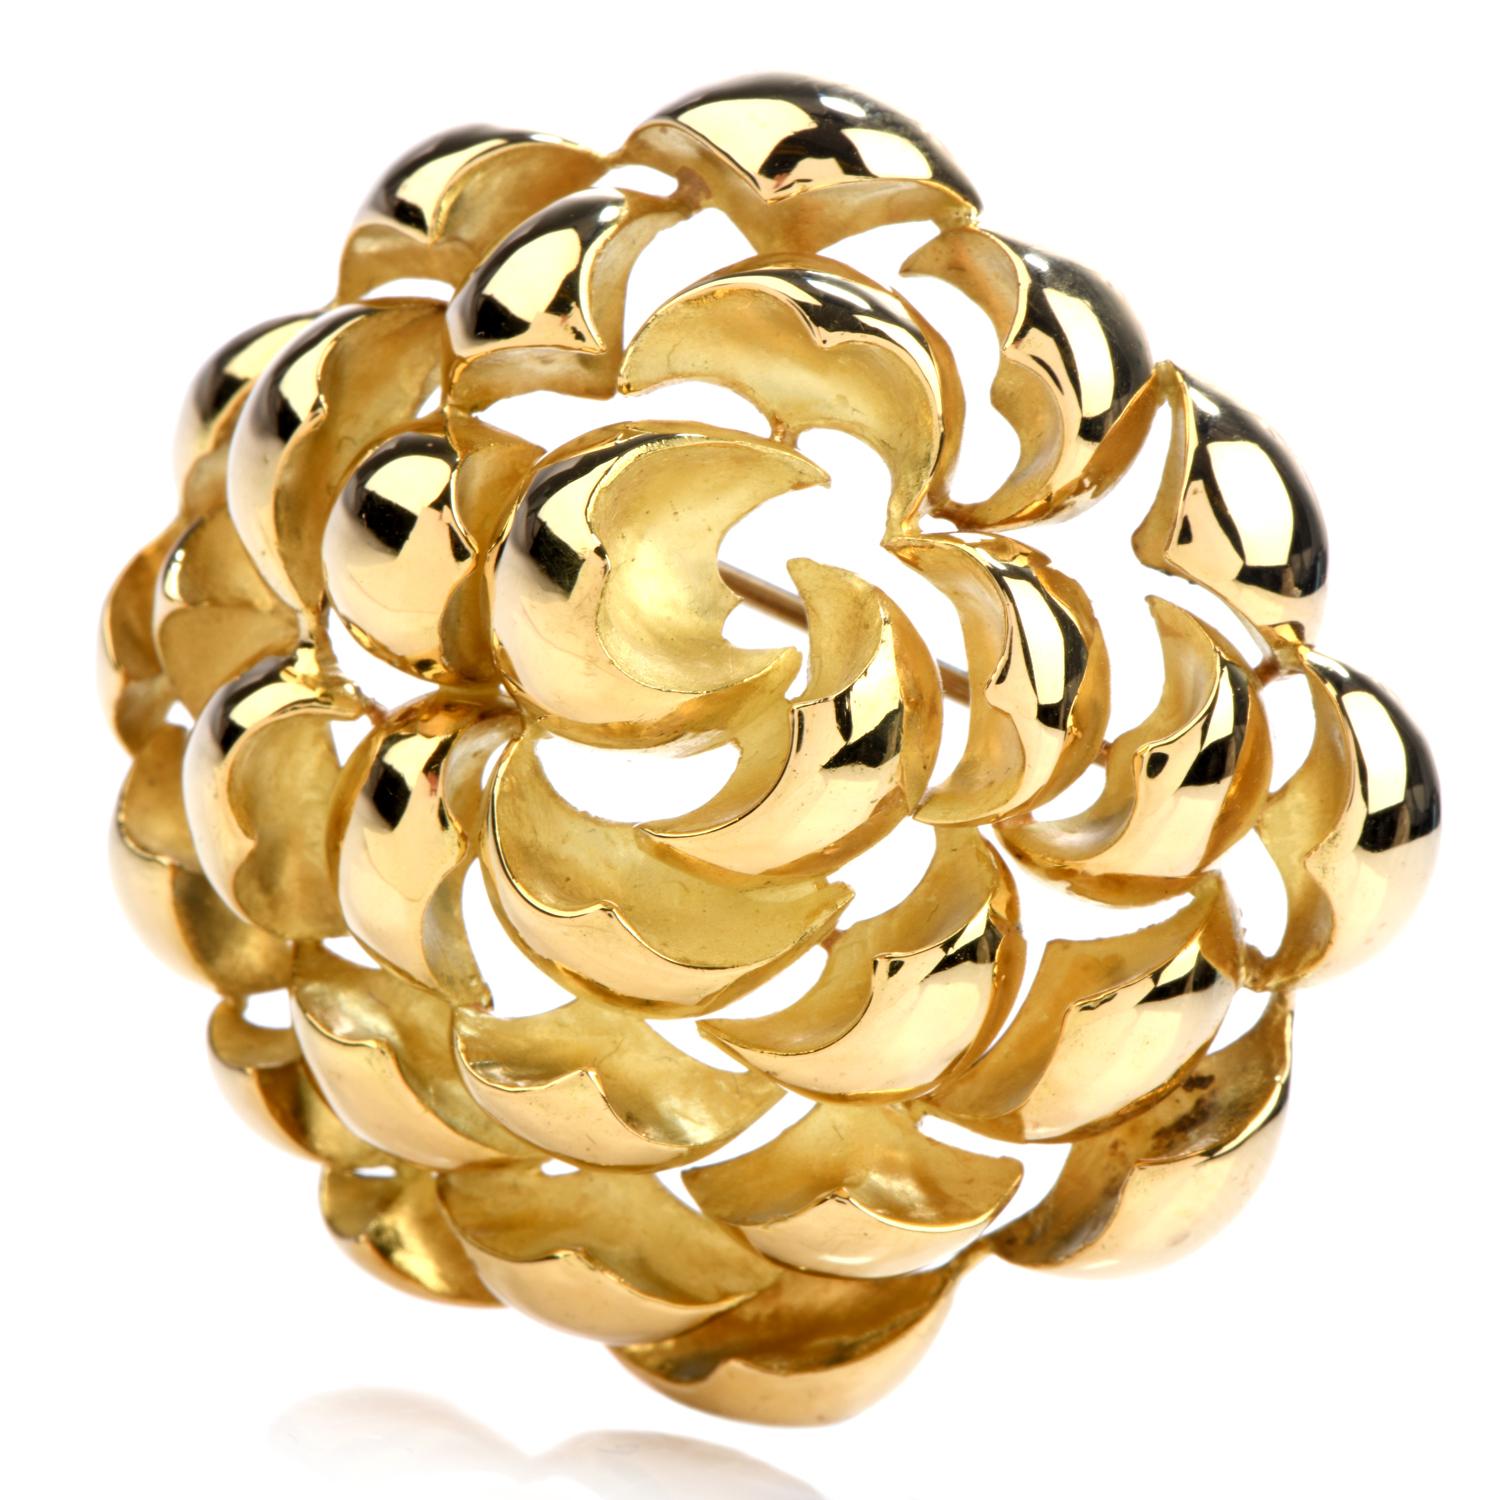 Let's Recognize the excellent Polished Finish and one of a Kind style from Tiffany & Co!

Italian Made, Crafted in Solid 18K Yellow Gold,

this piece has been masterfully & Delicately created with a swirl of Gold Petals, 

This is the perfect